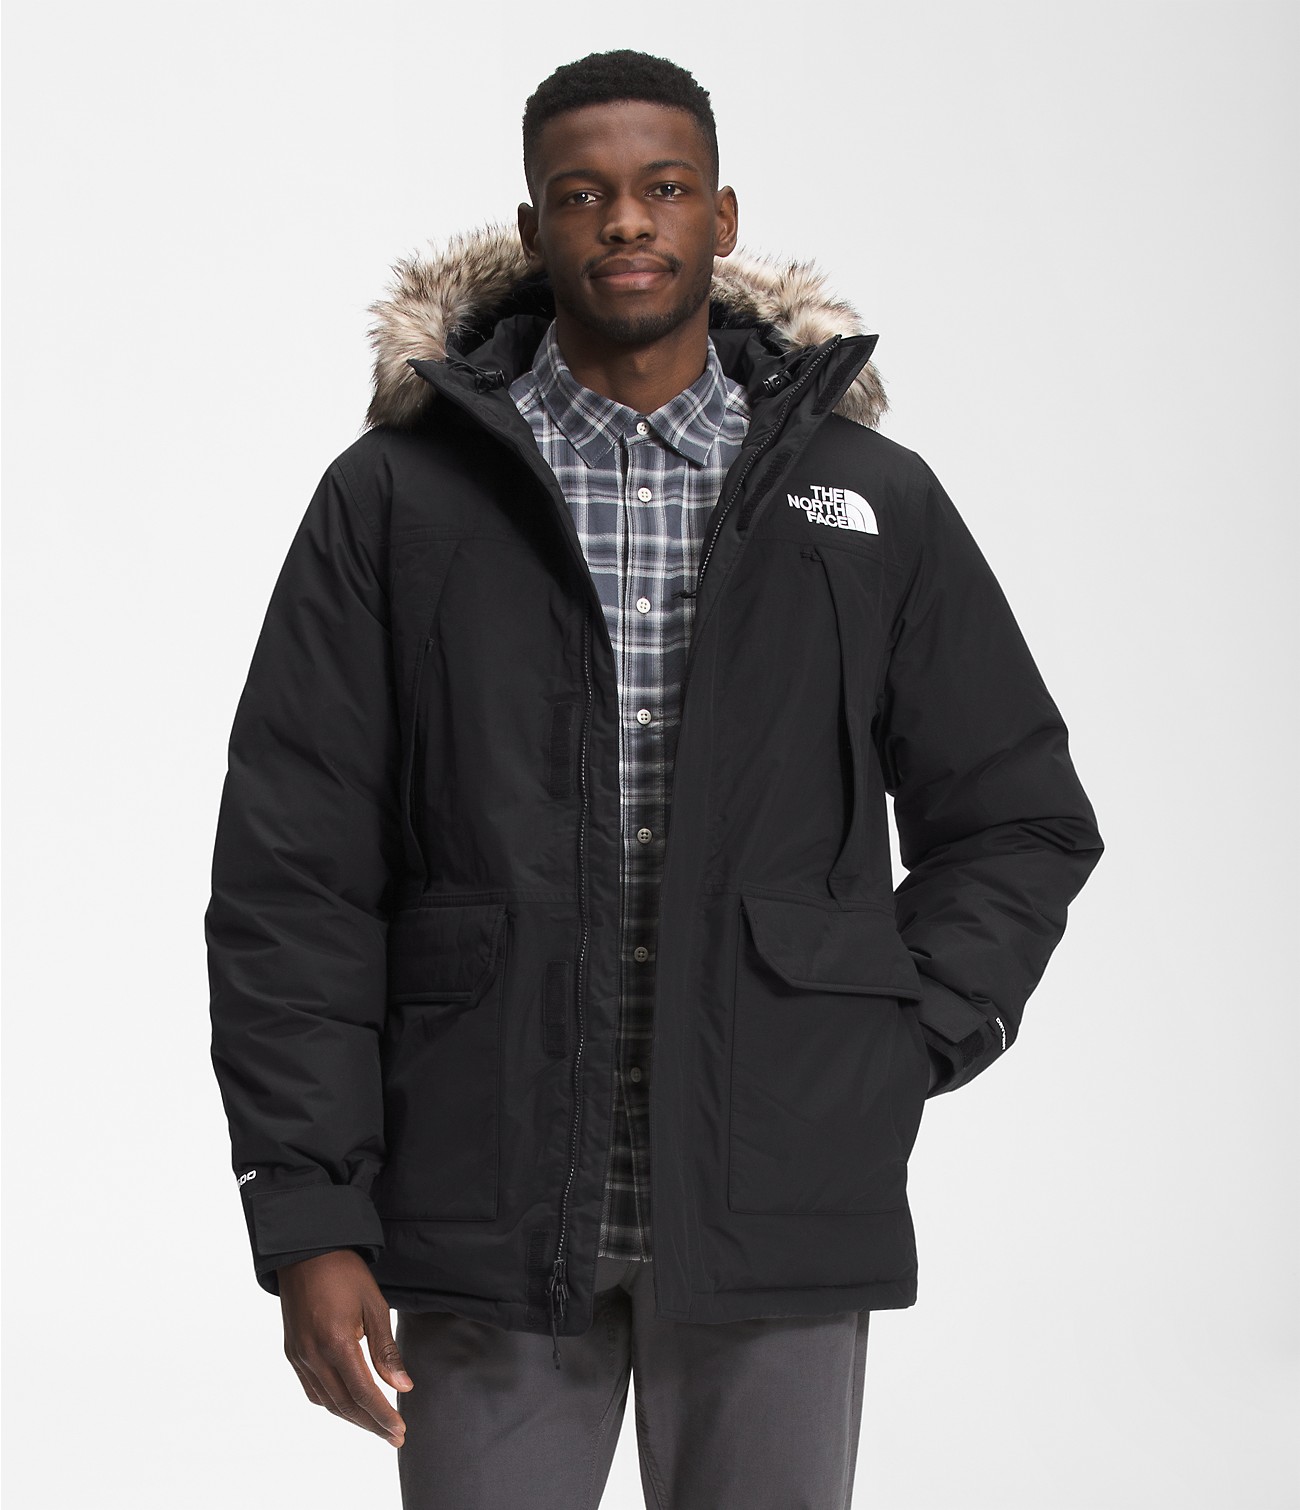 Unlock Wilderness' choice in the Eddie Bauer Vs North Face comparison, the McMurdo Parka by The North Face